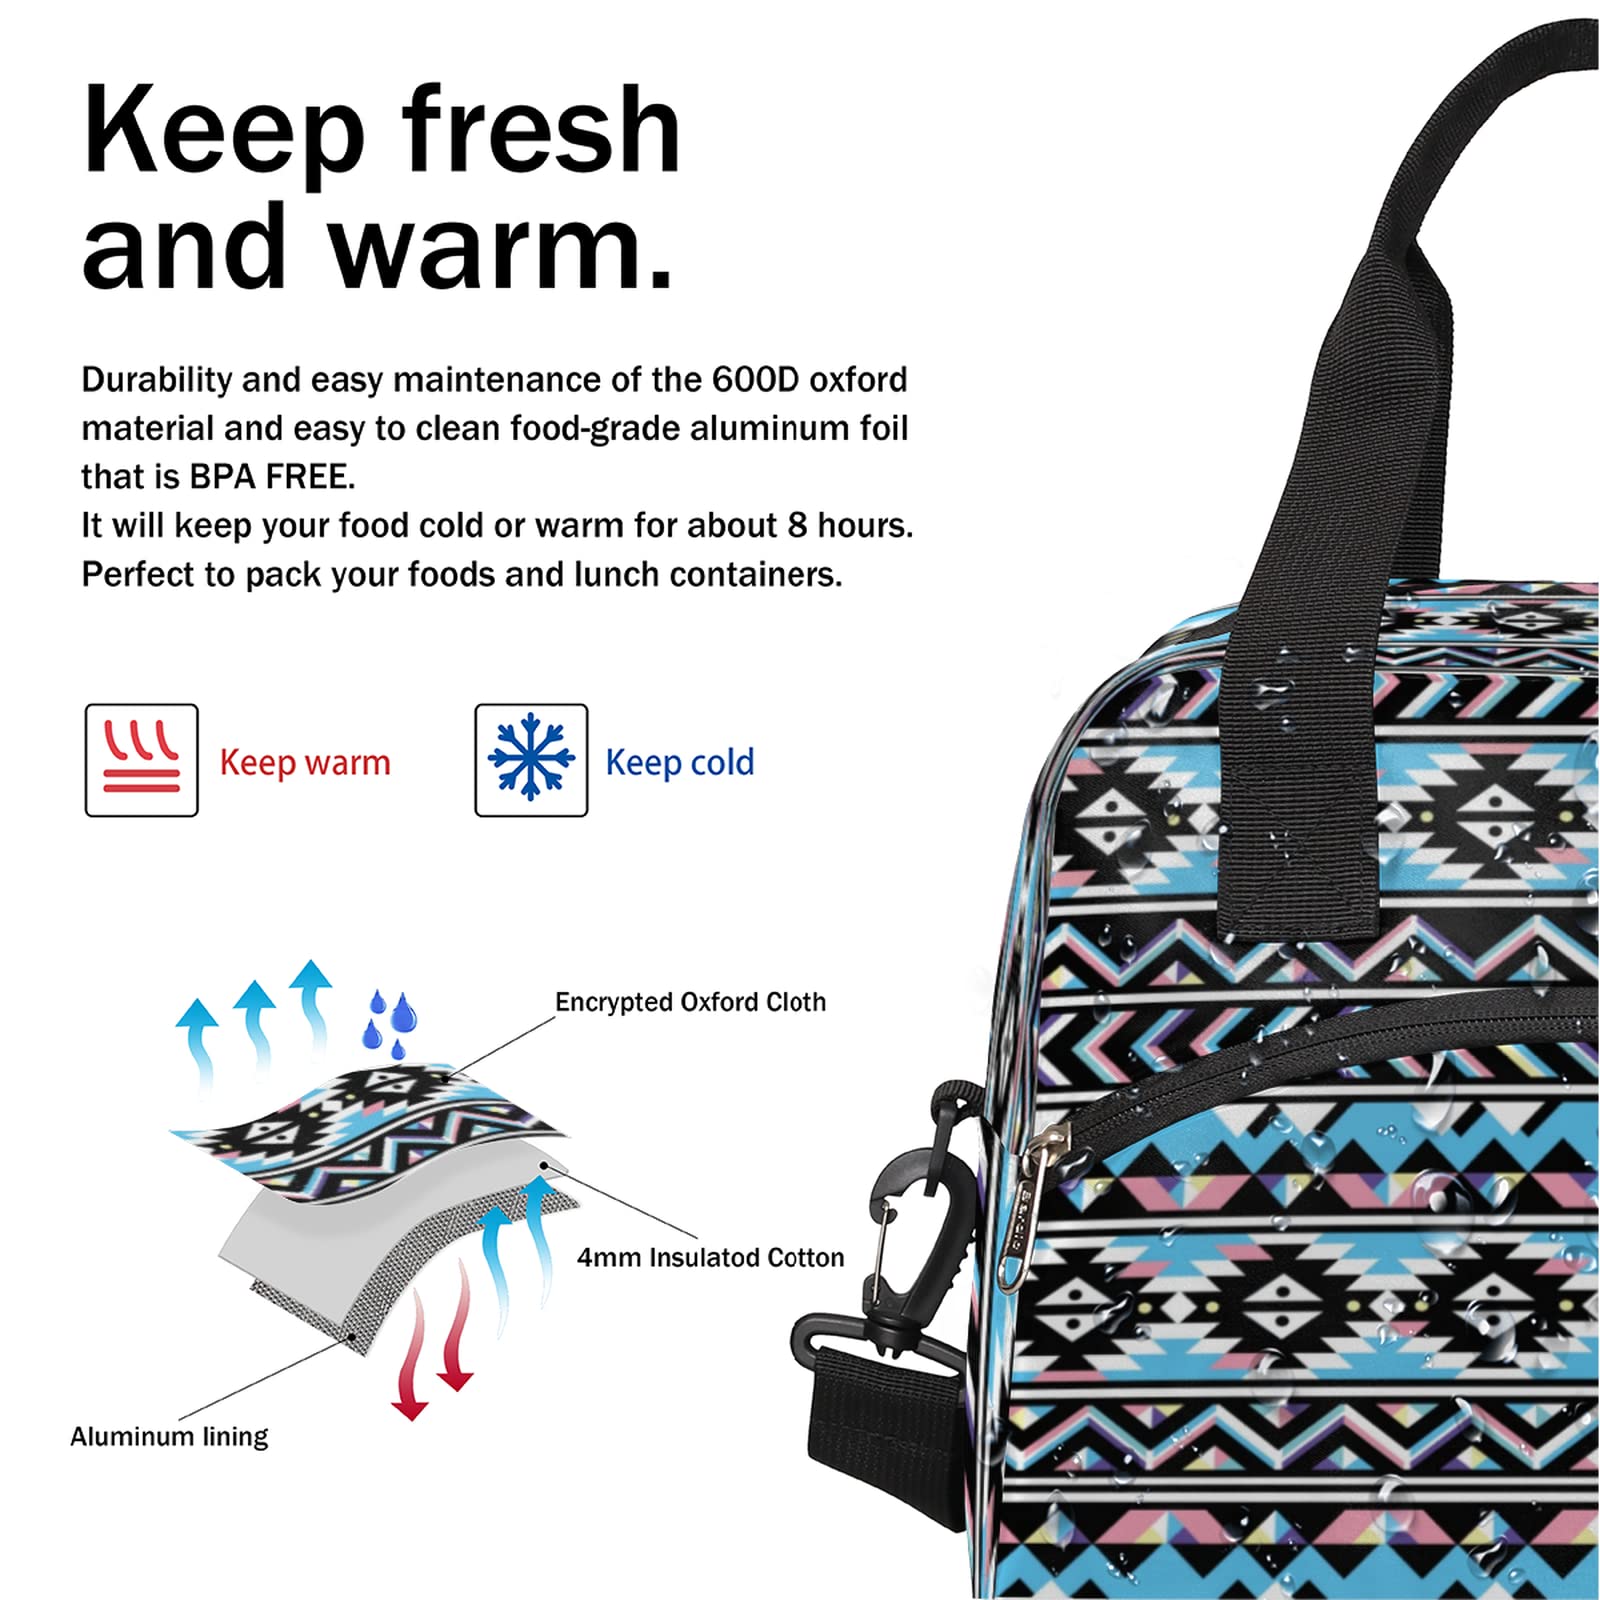 Aztec Geometric Pattern Lunch Bag Adjustable Shoulder Strap Cooler Bag Reusable Zipper Insulated Lunch Tote Bag for Work Picnic Camping School